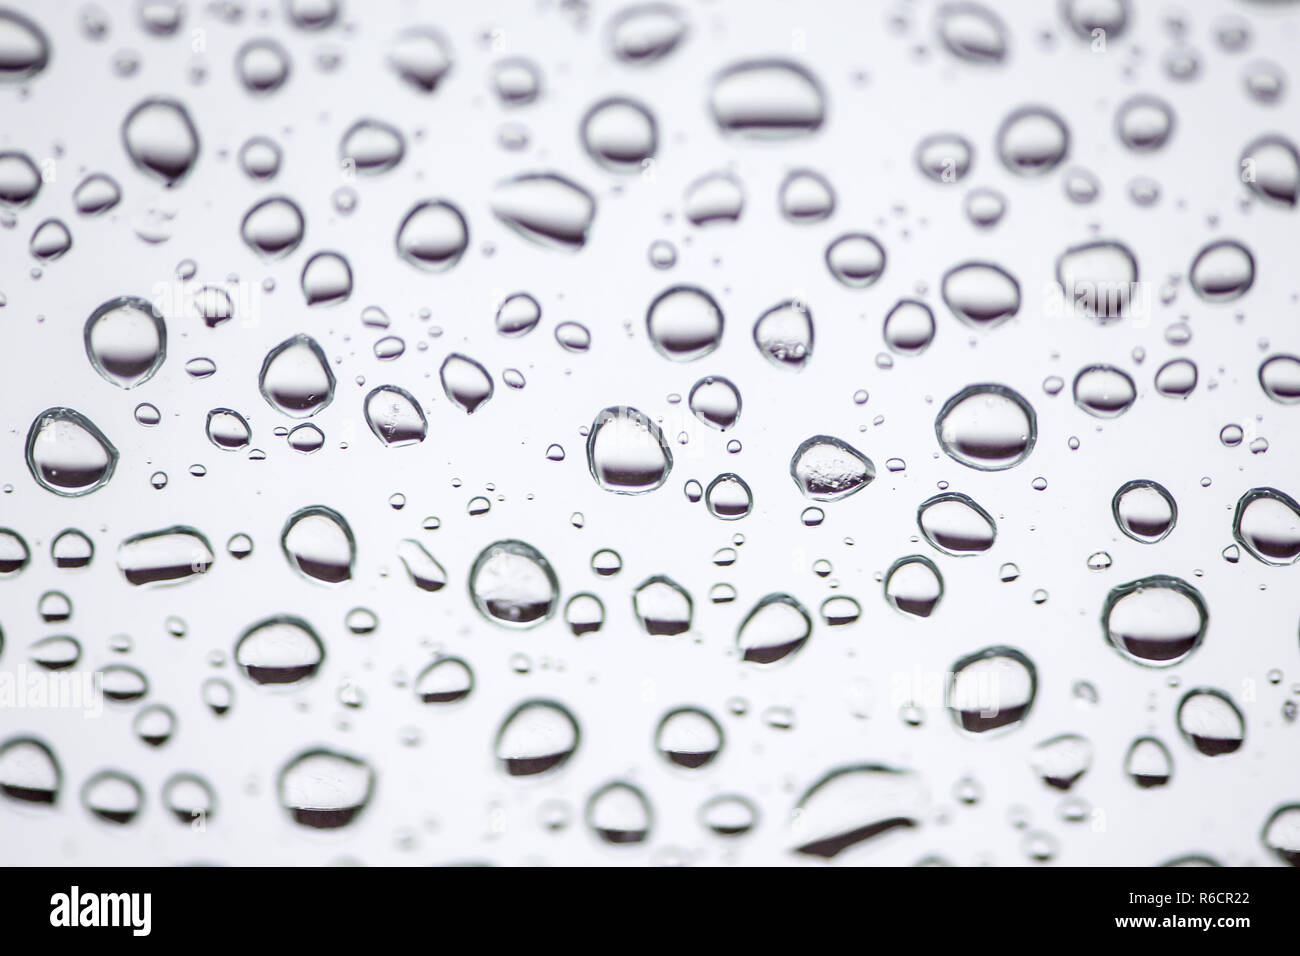 How To Draw Rain Drops | Drawing tutorials, outline, guades, tips for  artists - Art blog - www.swasky.net